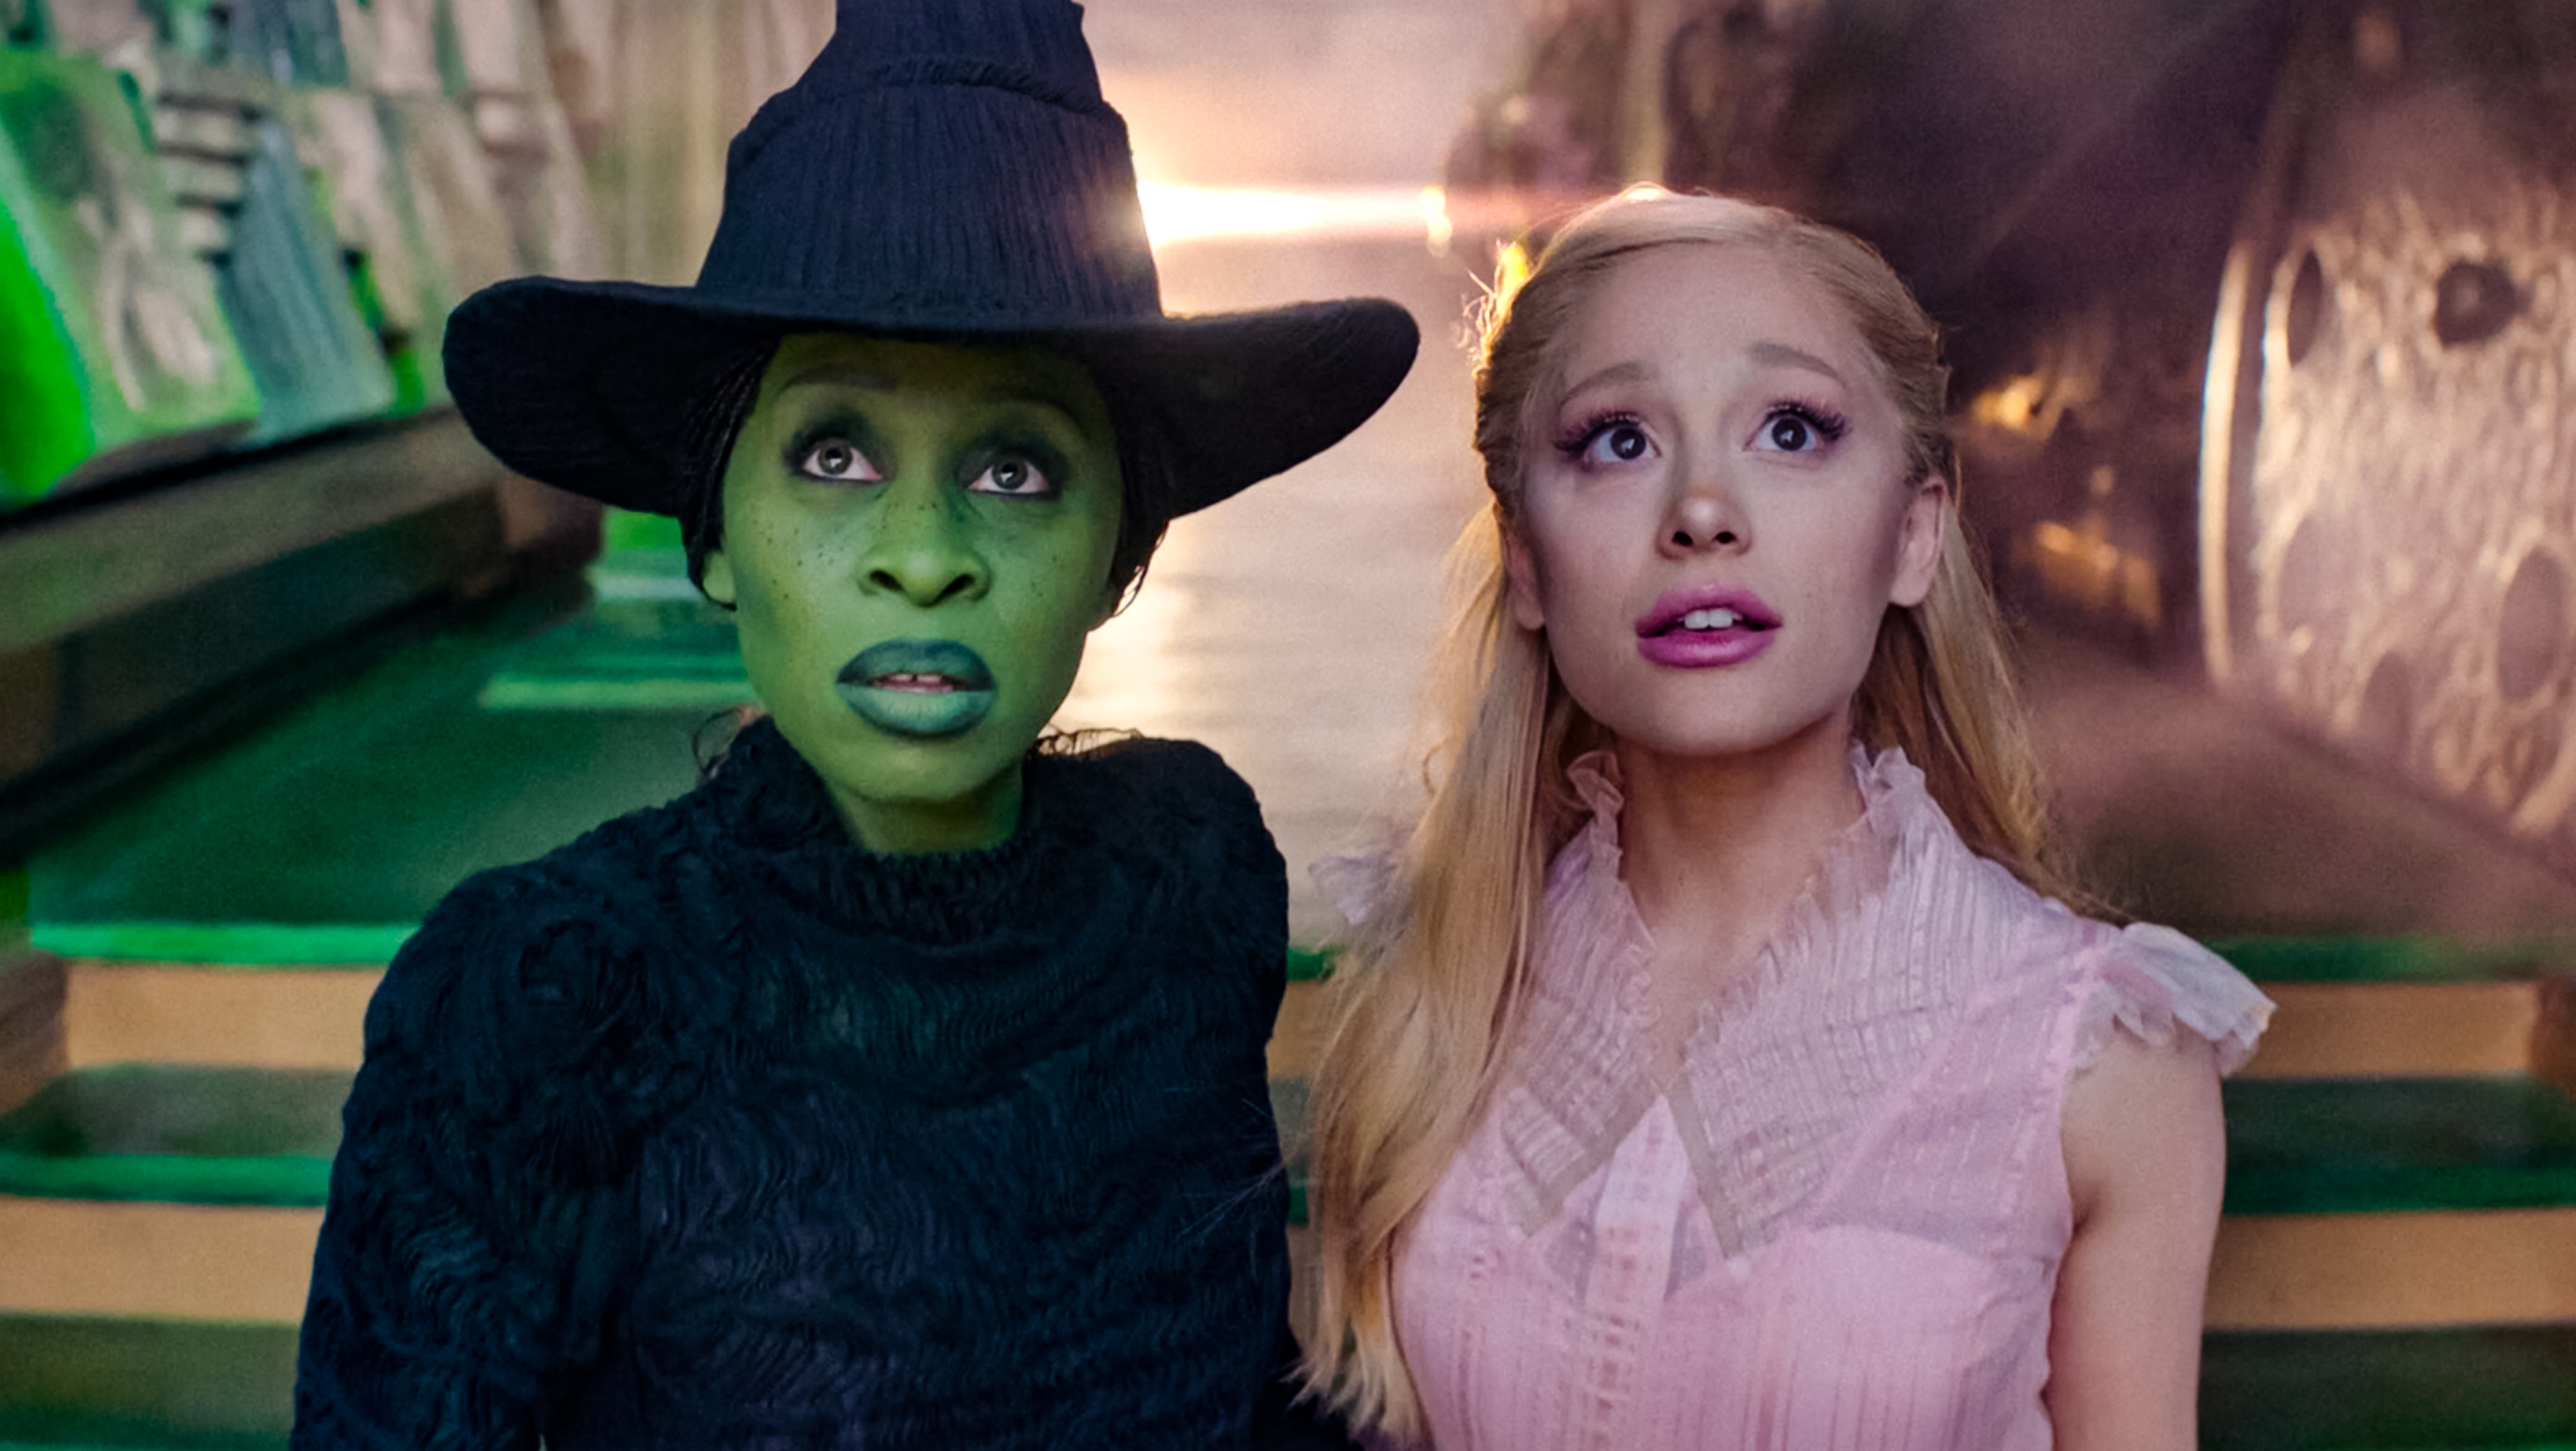 Cynthia Erivo and Ariana Grande in a scene from the upcoming film Wicked